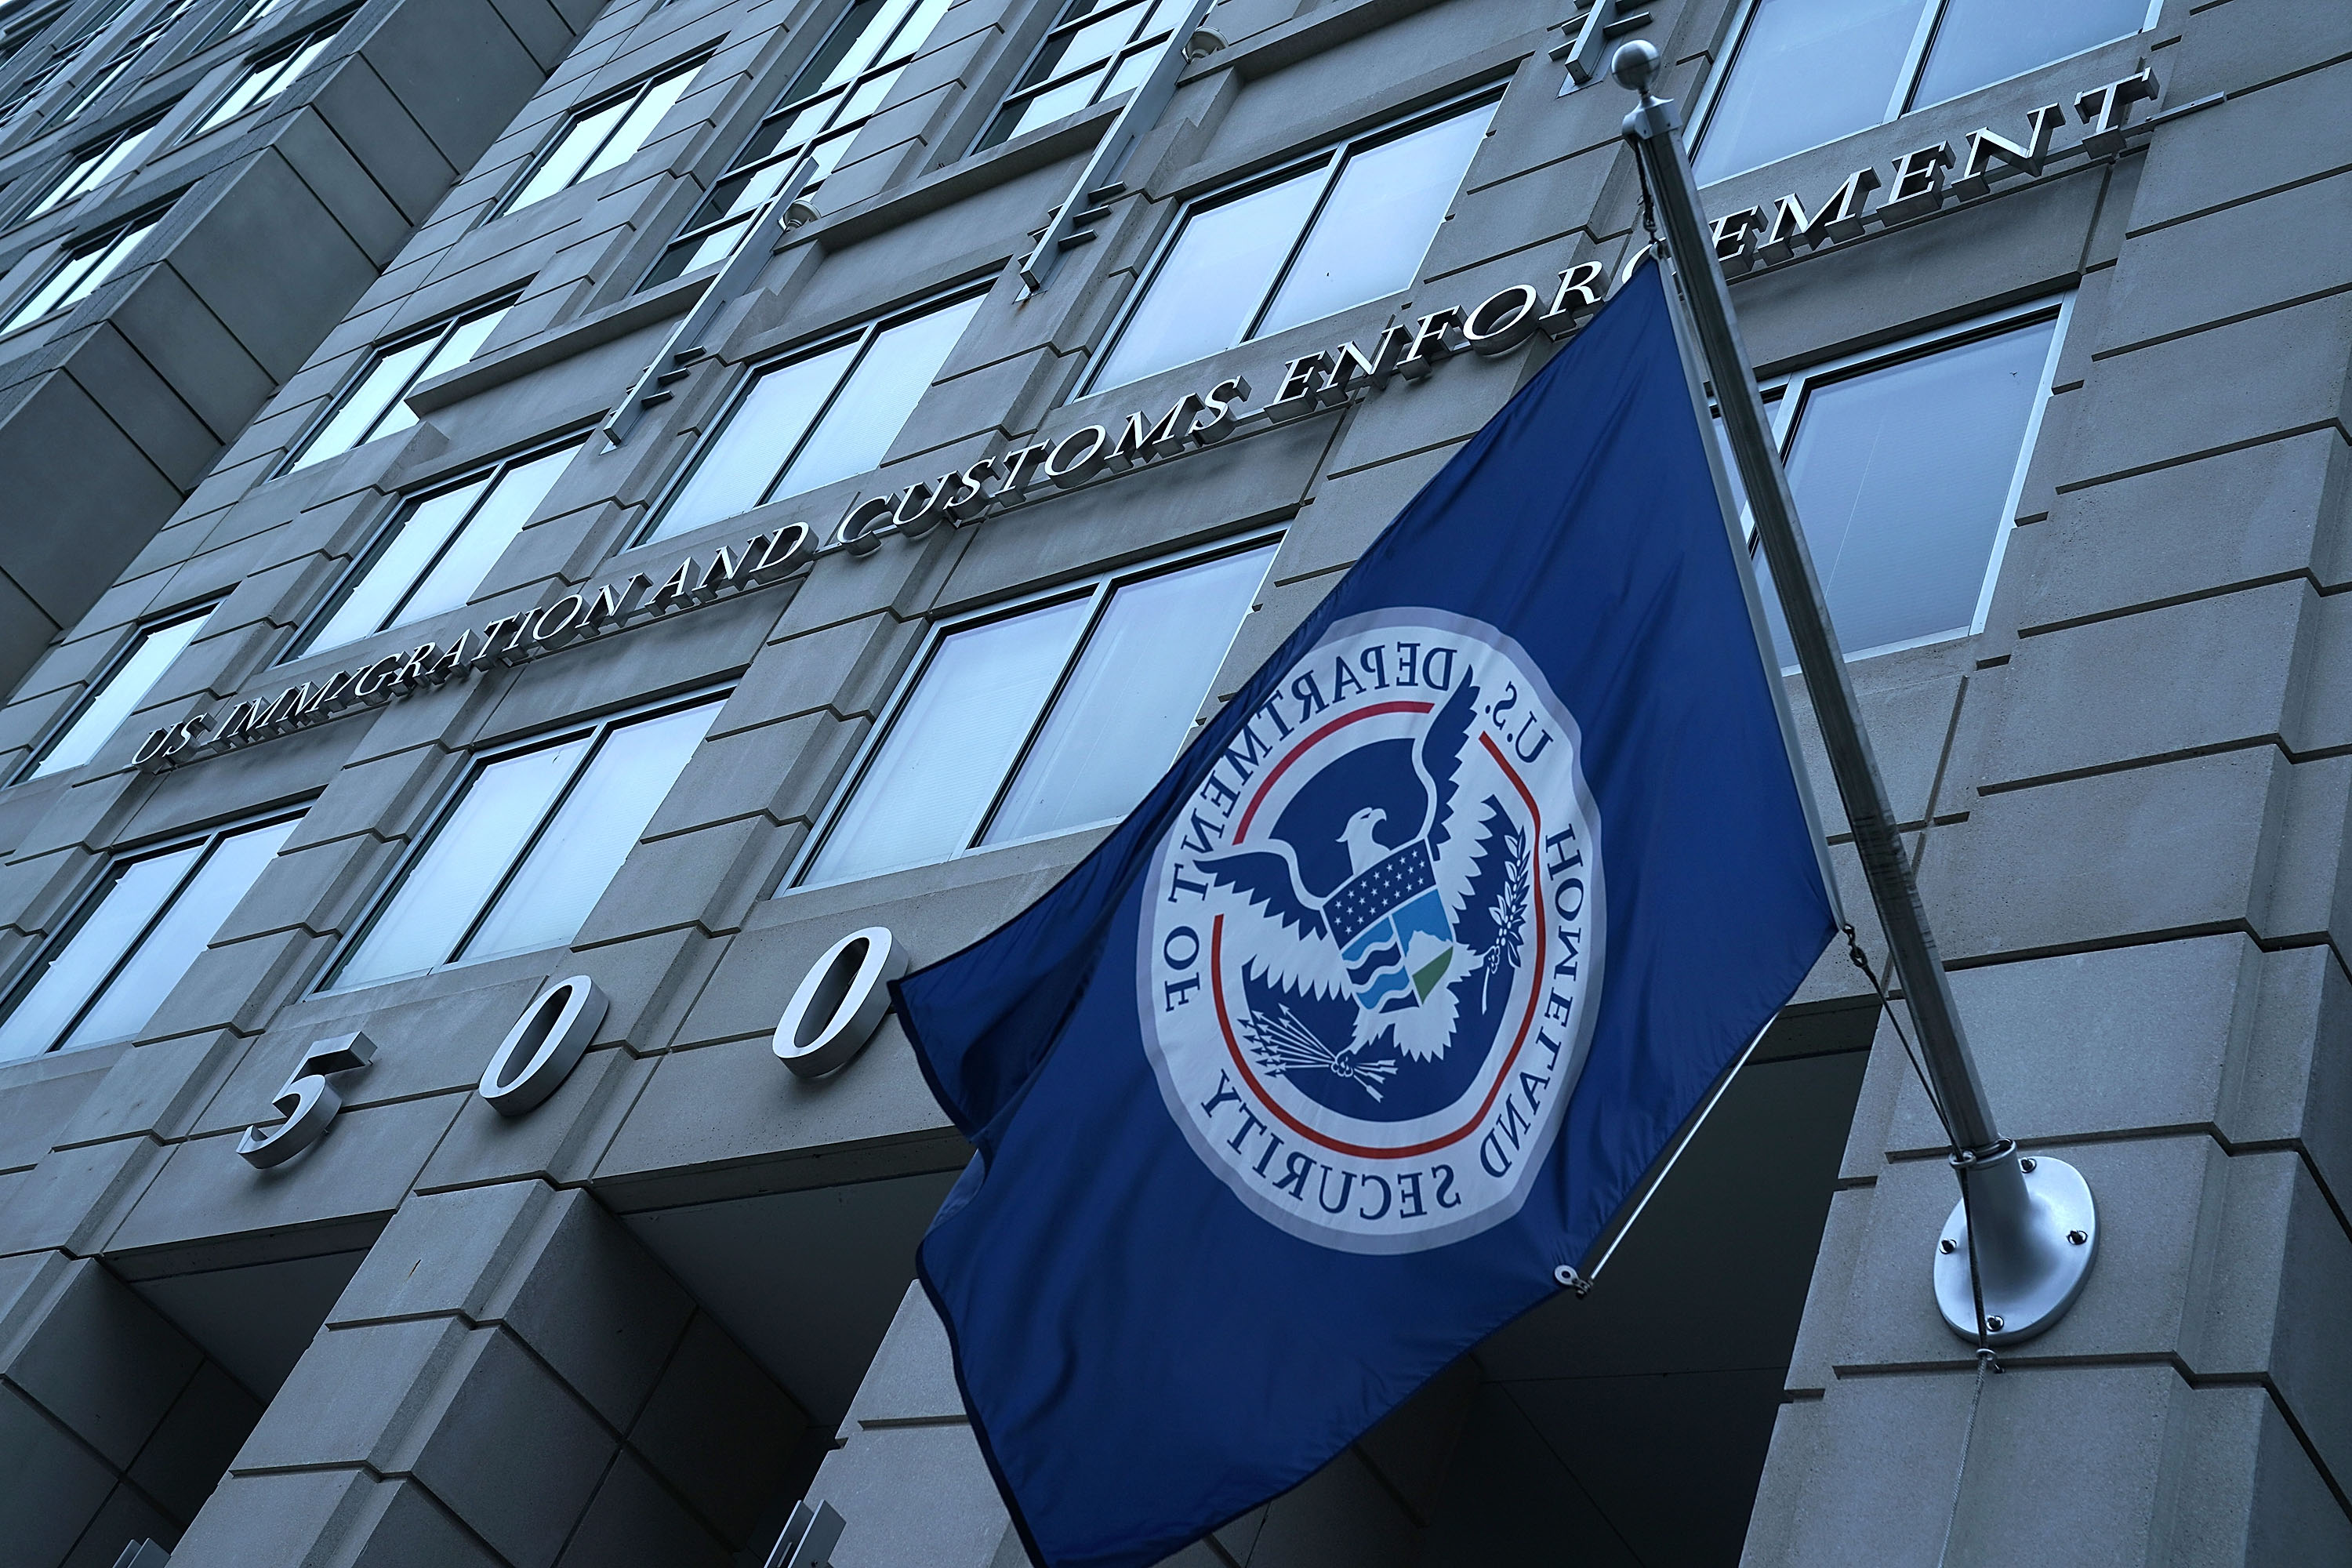 WASHINGTON, DC - JULY 06: An exterior view of U.S. Immigration and Customs Enforcement (ICE) agency headquarters is seen July 6, 2018 in Washington, DC. U.S. Vice President Mike Pence placed a visit to the agency and received a briefing on "ICE's overall mission on enforcement and removal operations, countering illicit trade, and human smuggling." (Photo by Alex Wong/Getty Images)